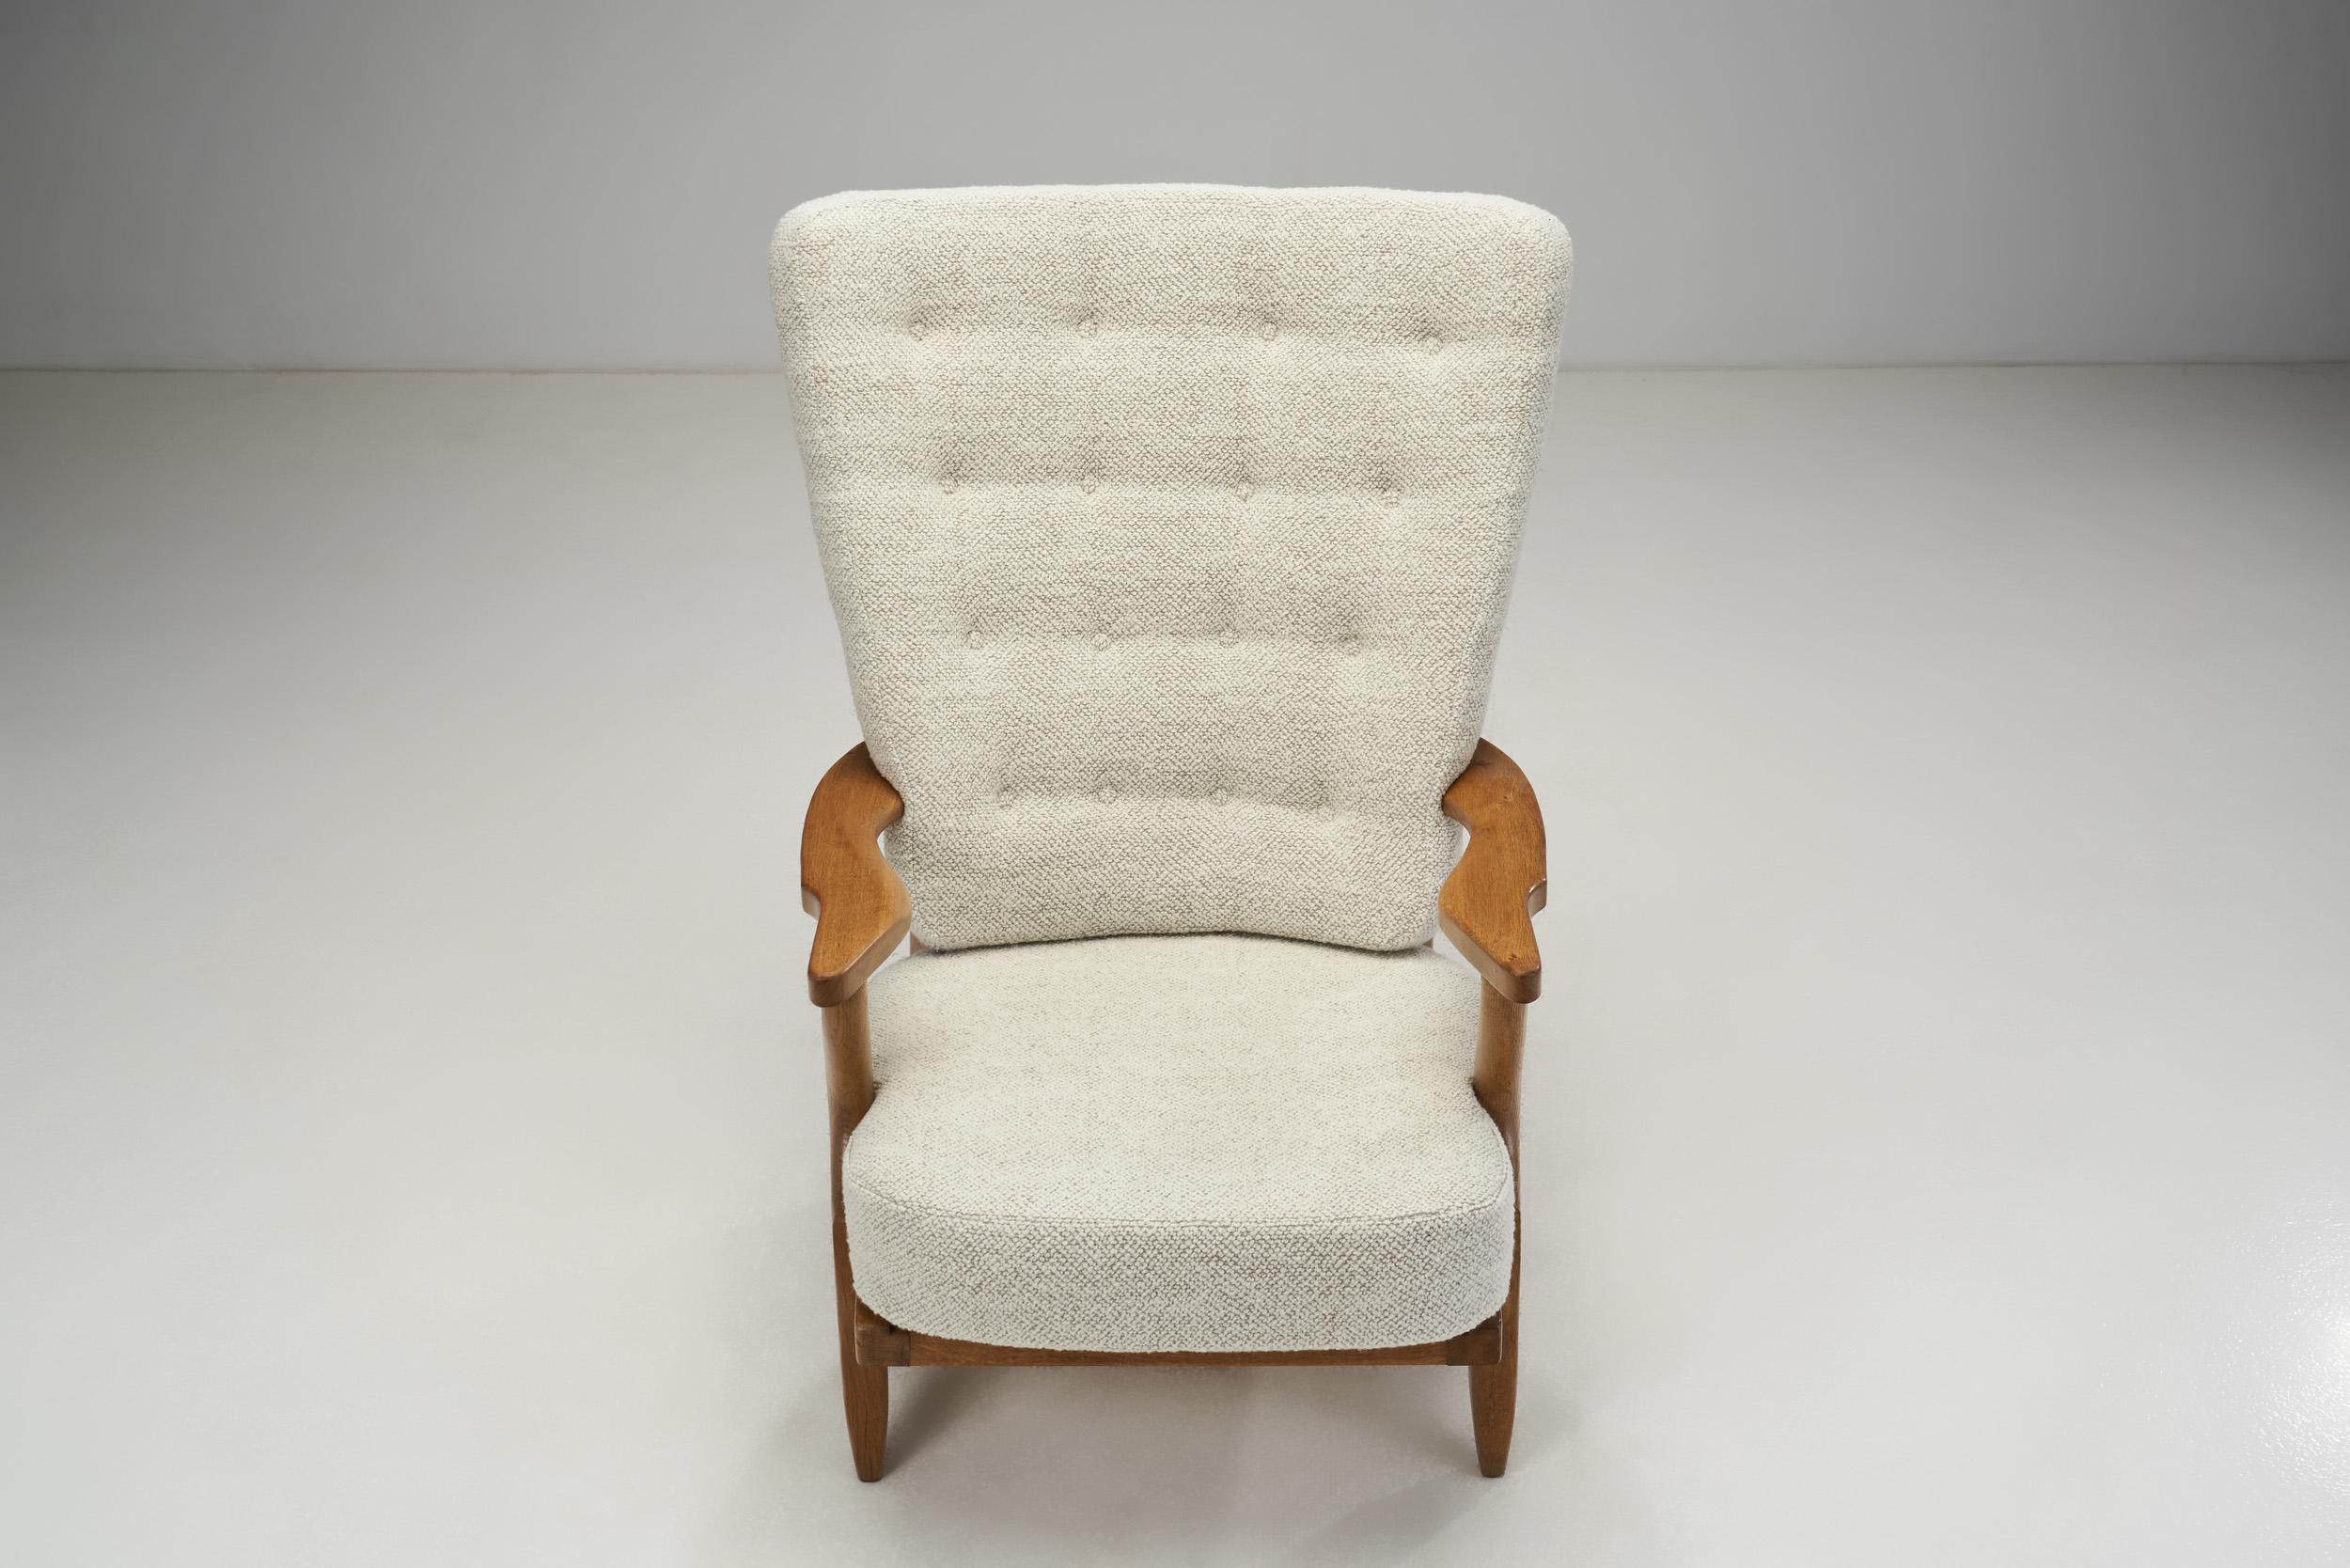 Mid-20th Century Oaken “Grand Repos” Lounge Chair by Guillerme et Chambron, France 1950s